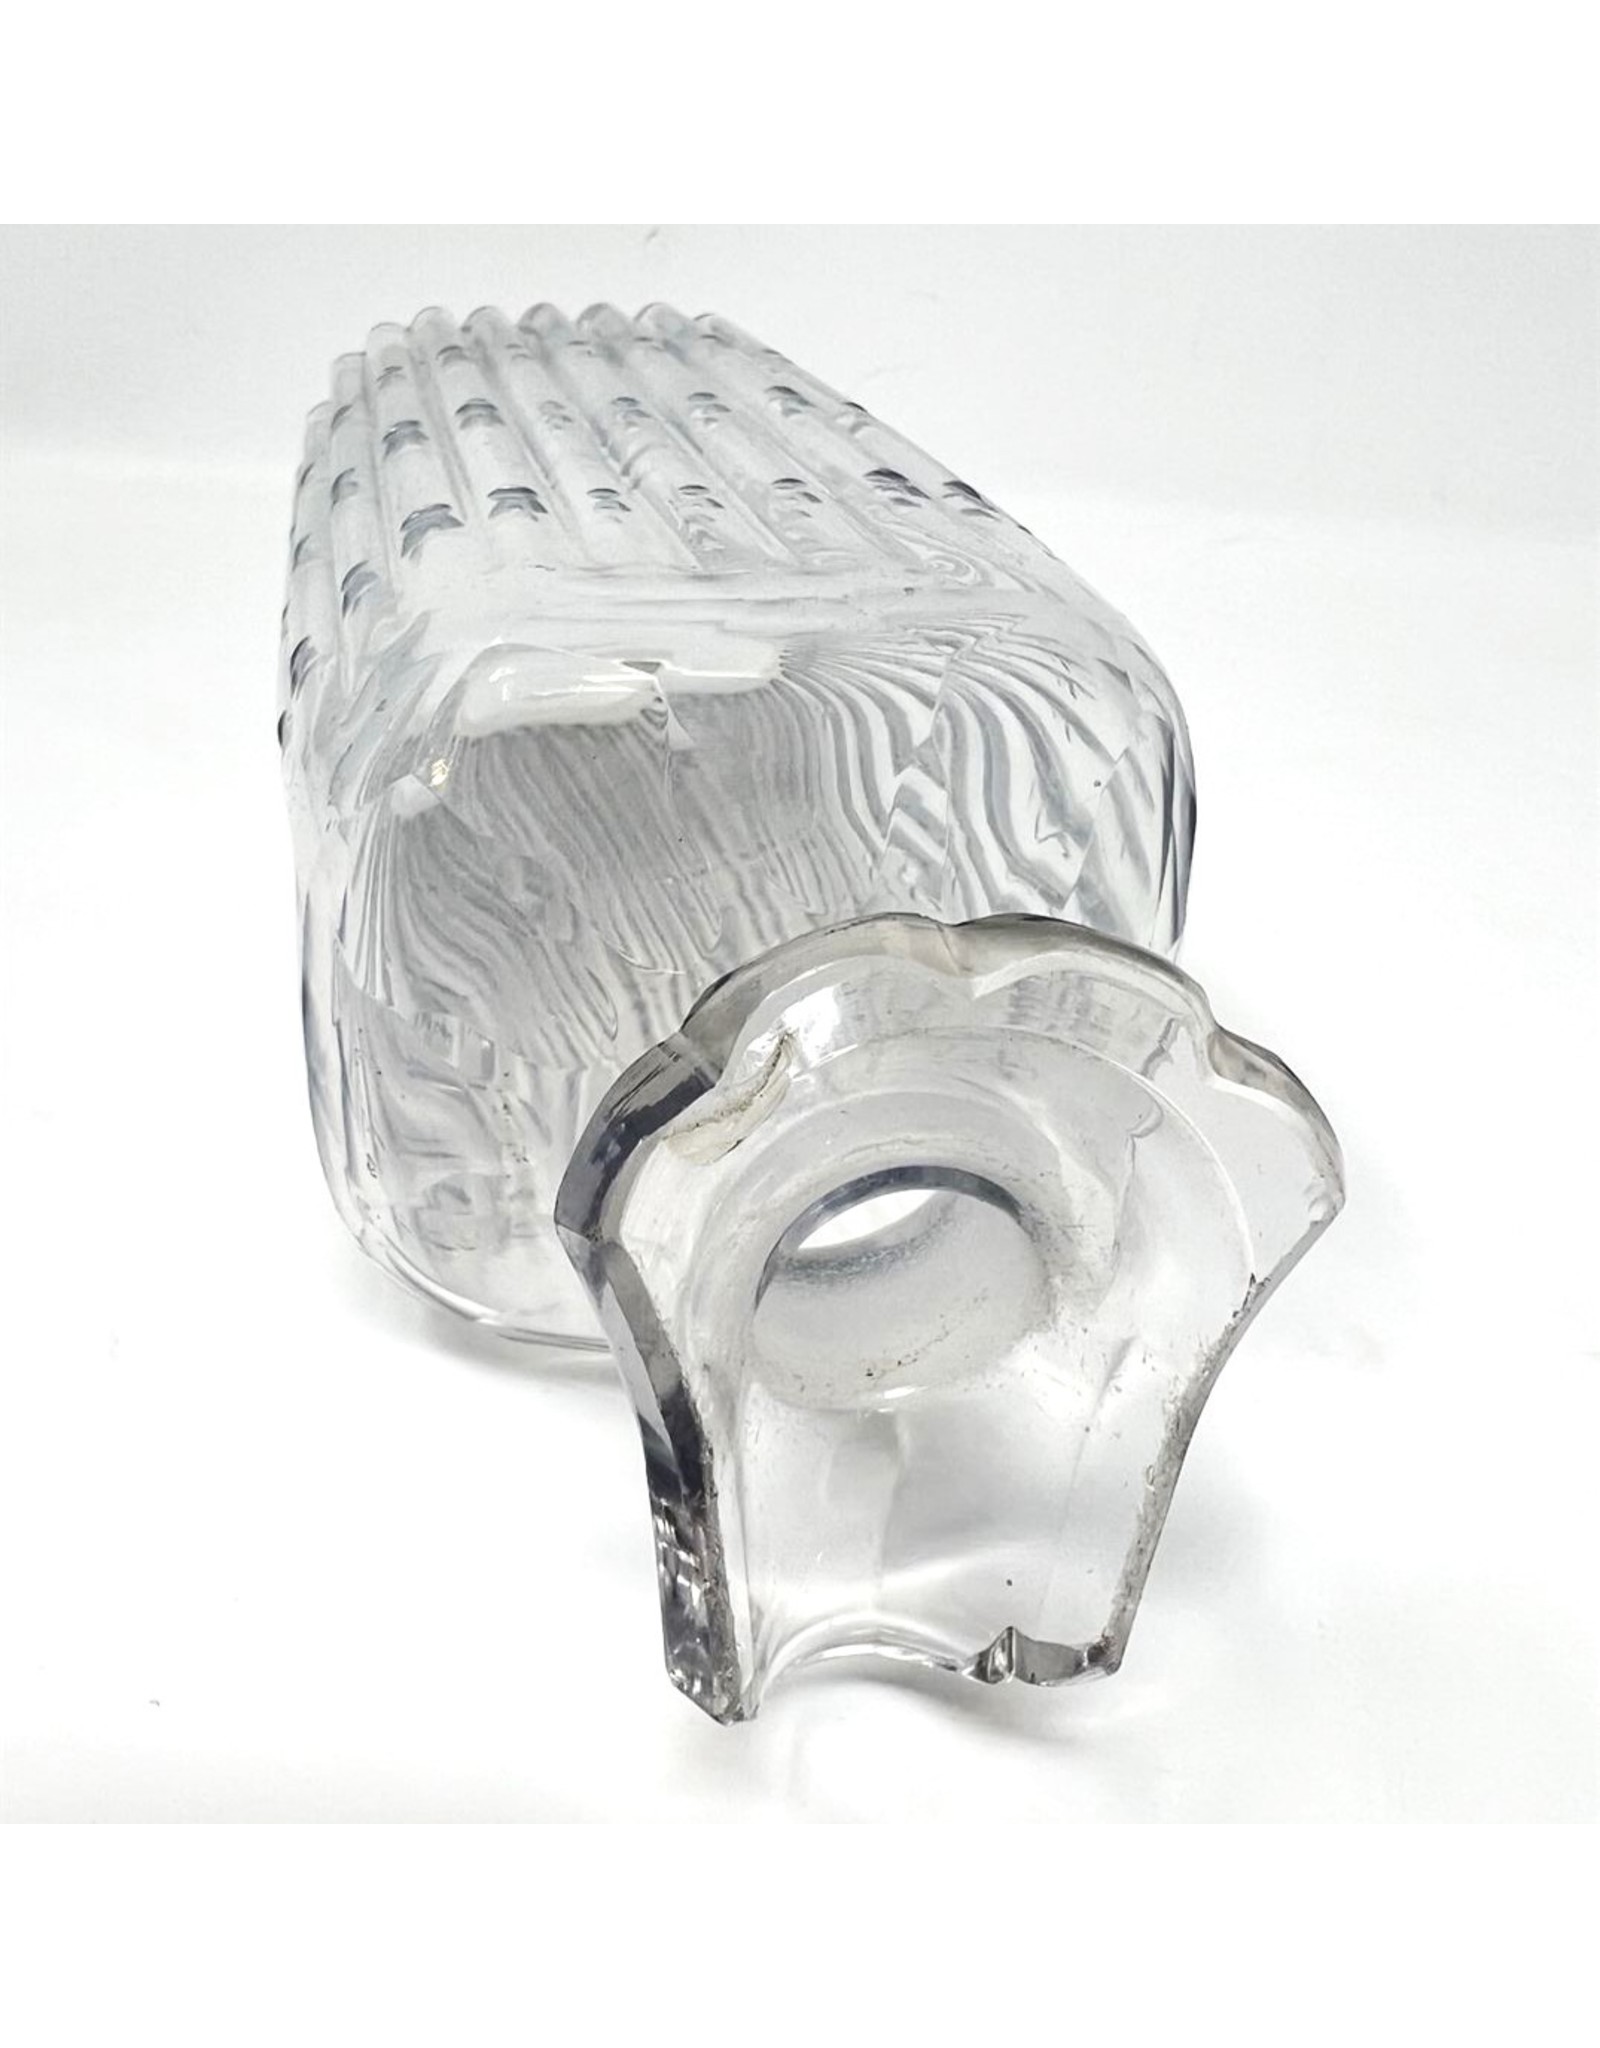 Decanter - antique hand cut crystal, small, with stopper